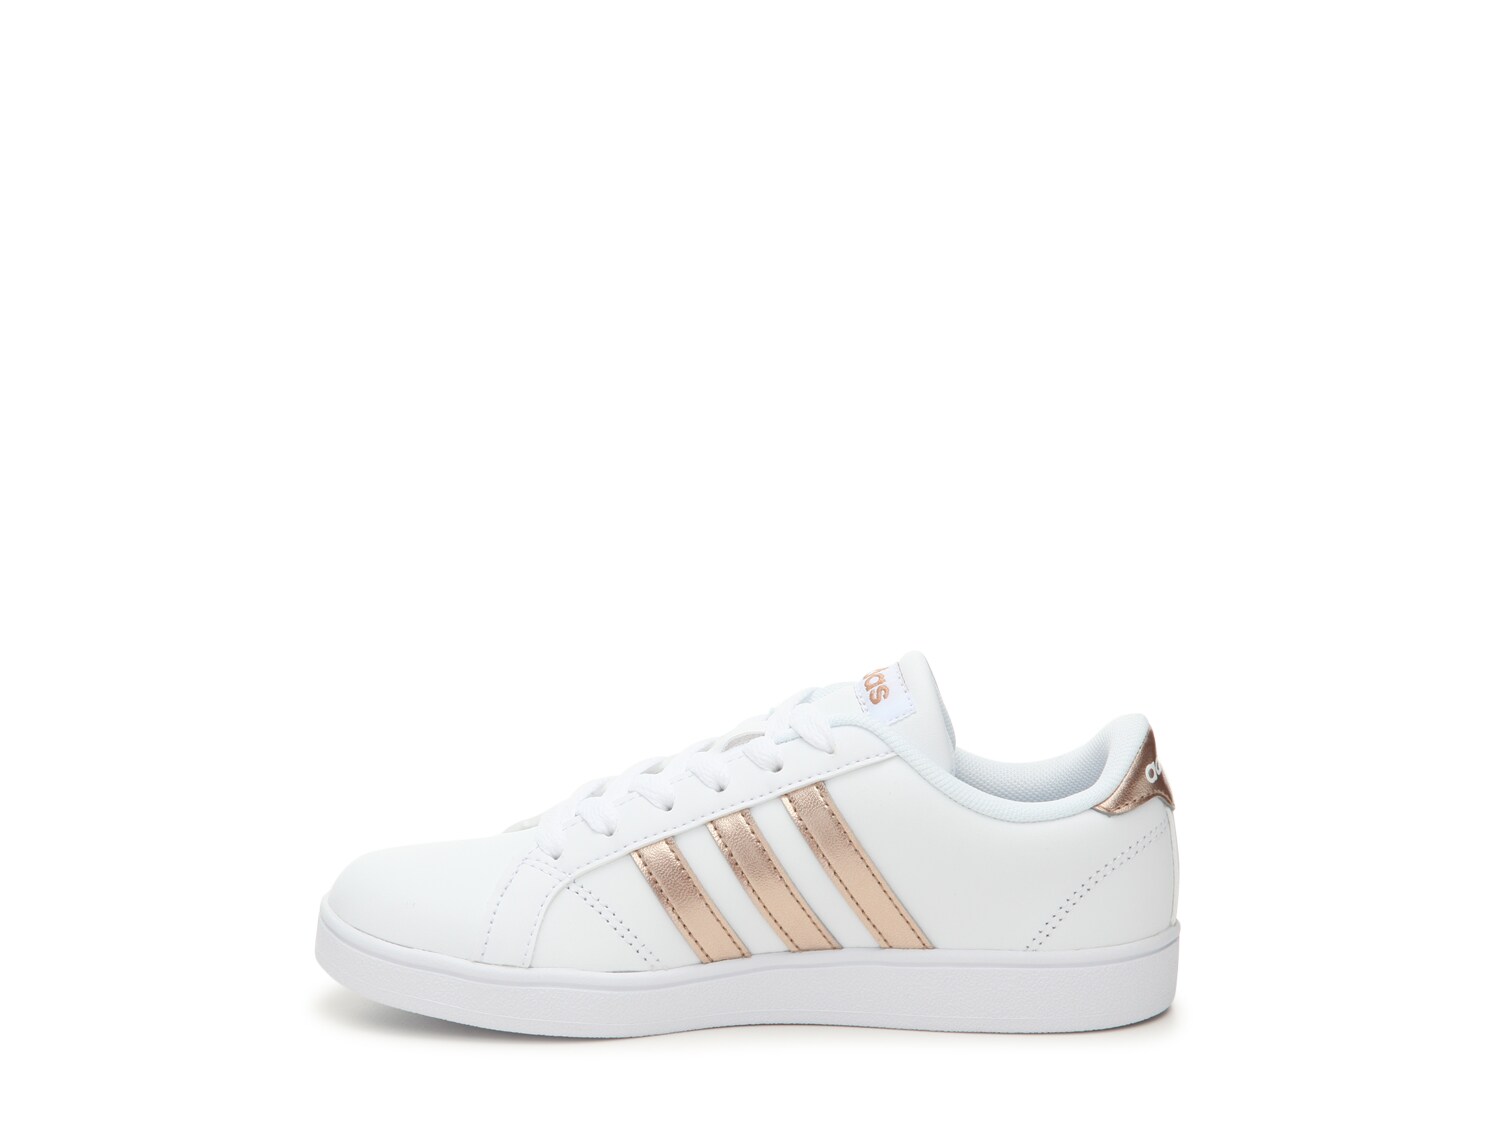 adidas baseline youth sneaker rose gold